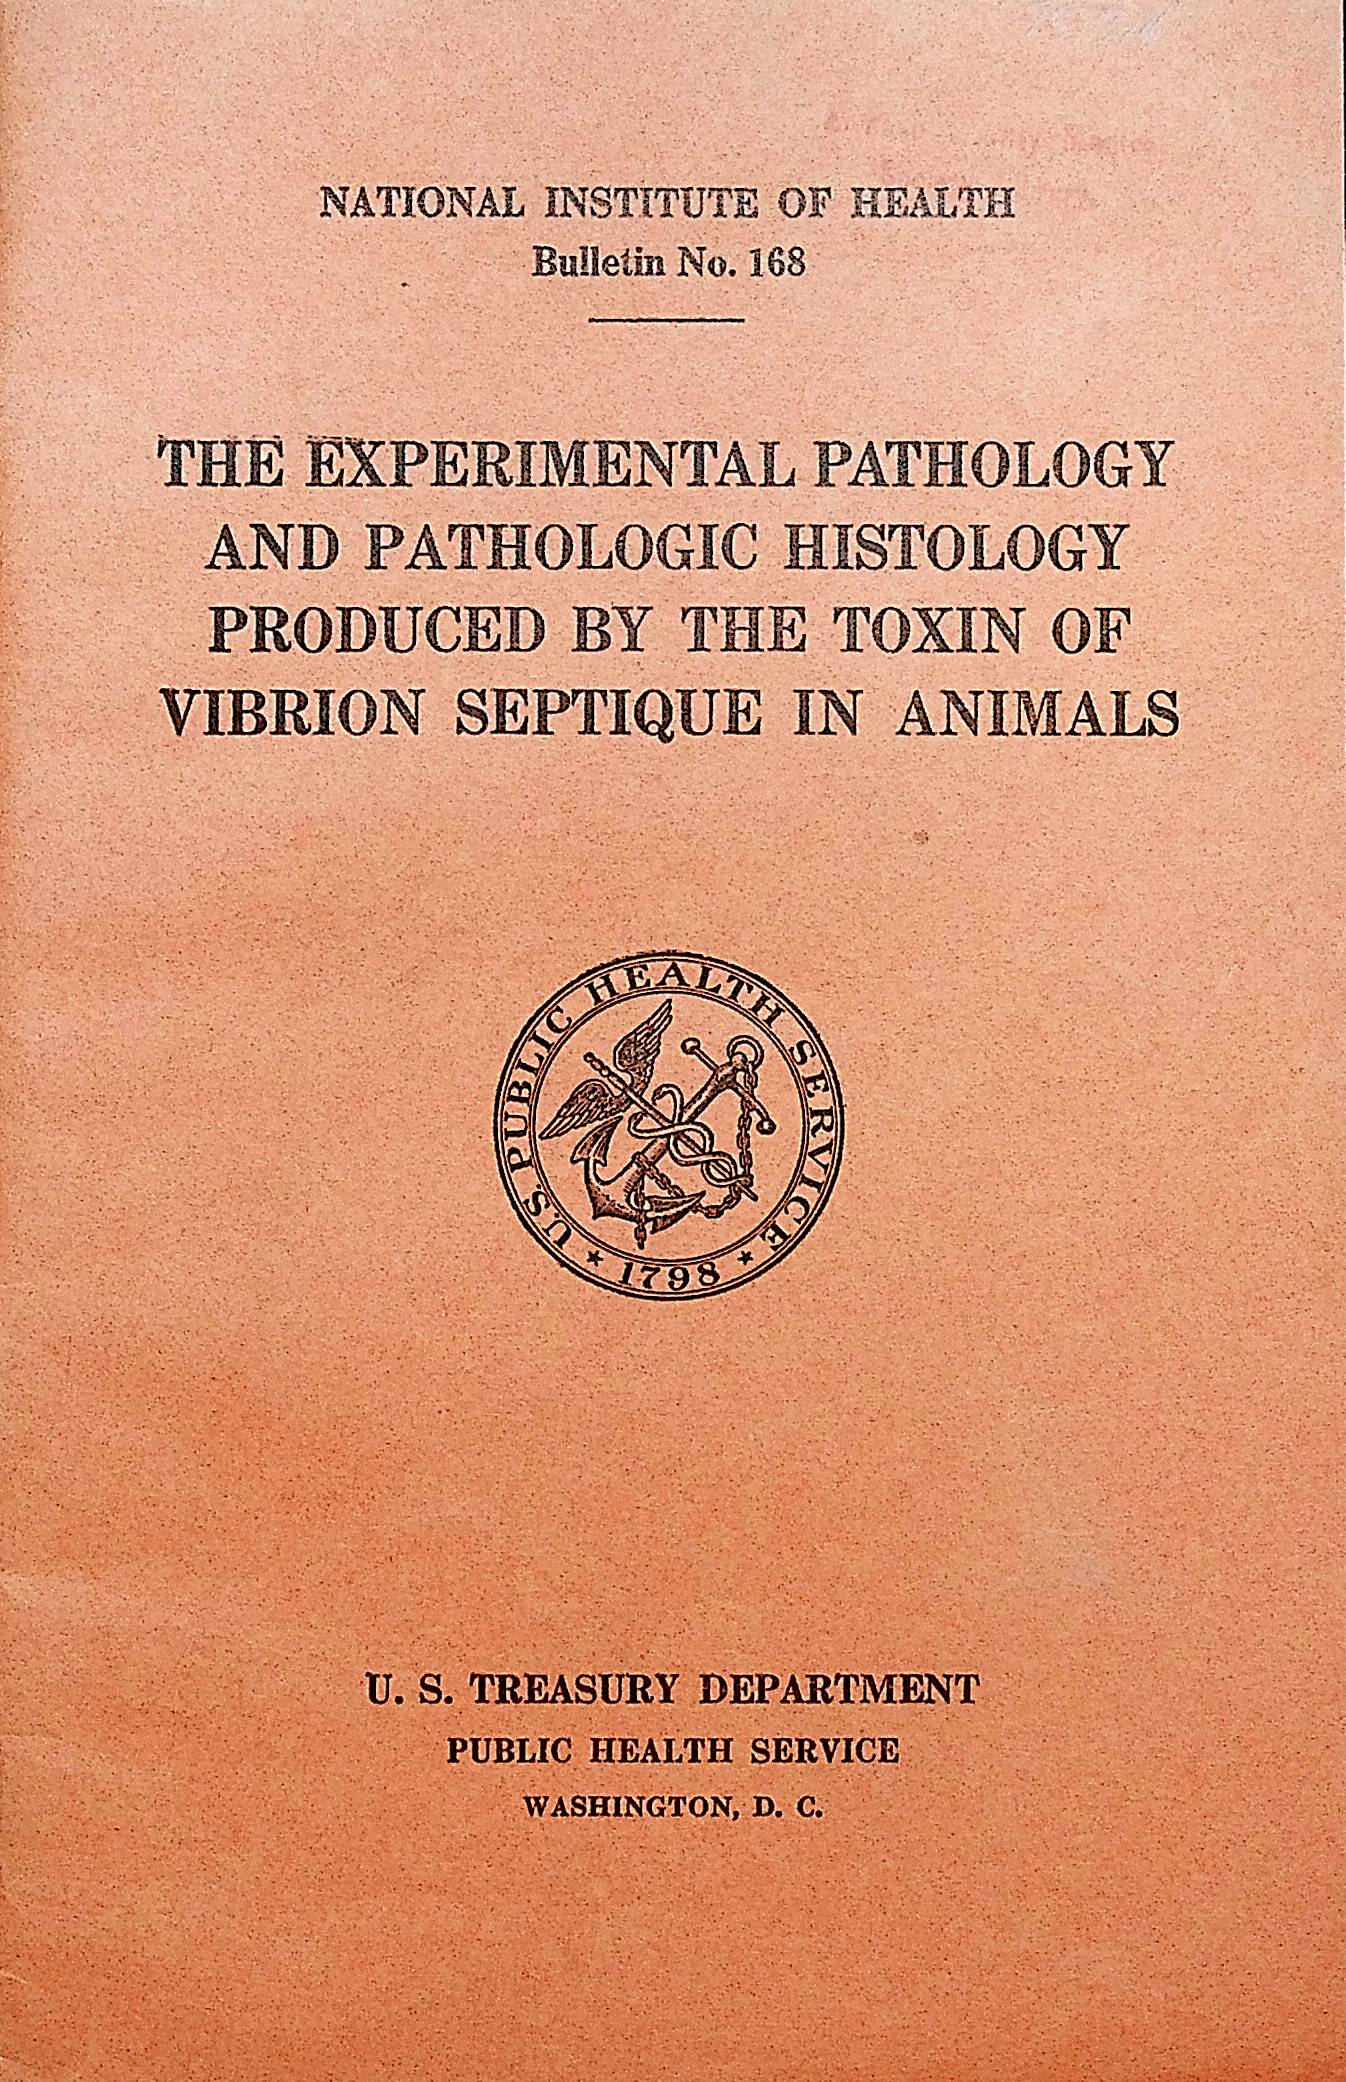 Image for The Experimental Pathology and Pathologic Histology Produced by the Toxin of Vibrion Septique in Animals